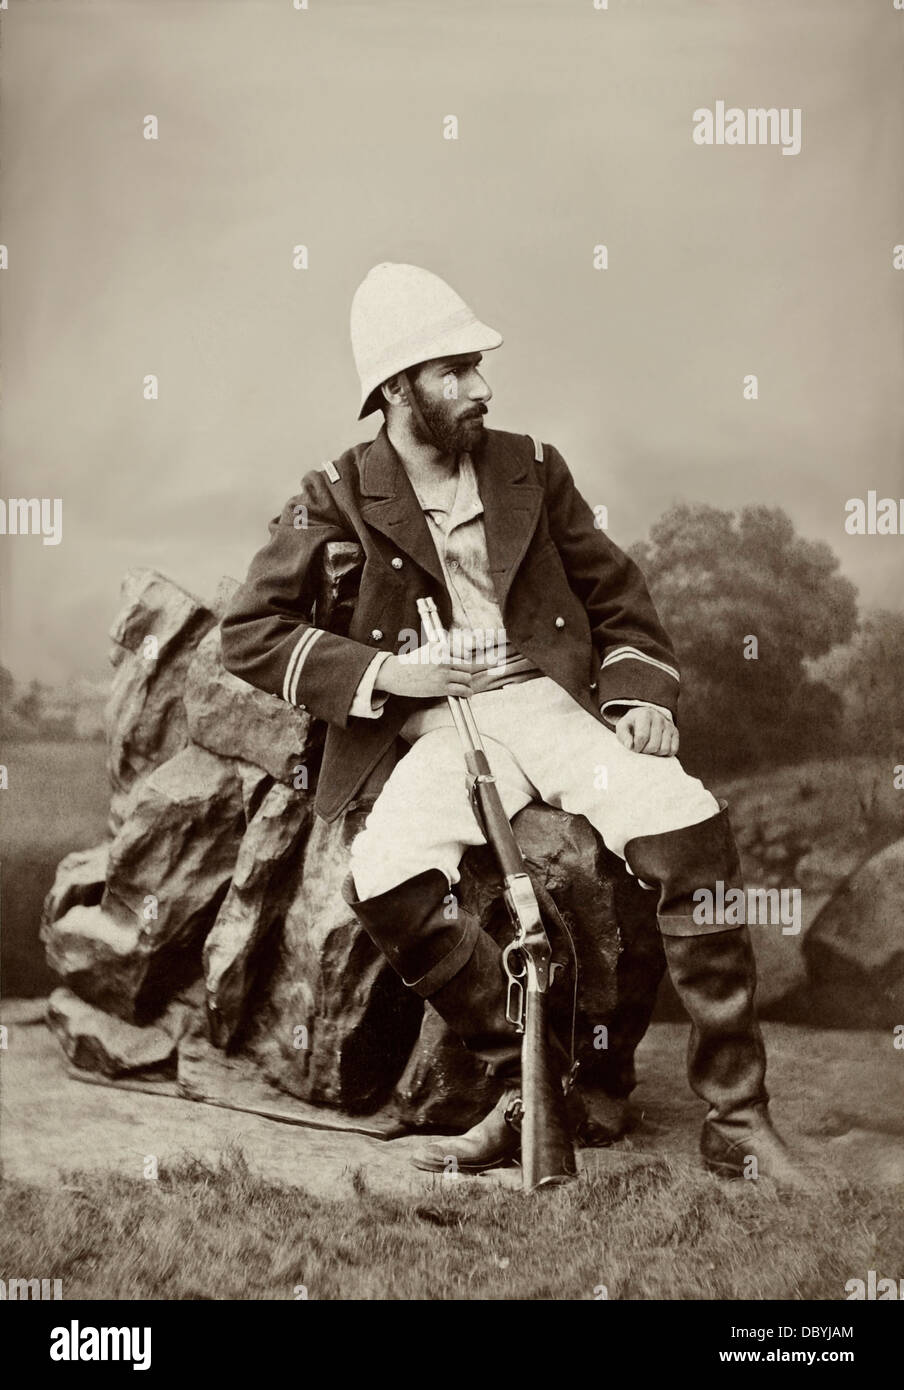 Pierre Savorgnan de Brazza (1852-1905), french navy officer, and explorer of the Central Africa. Stock Photo